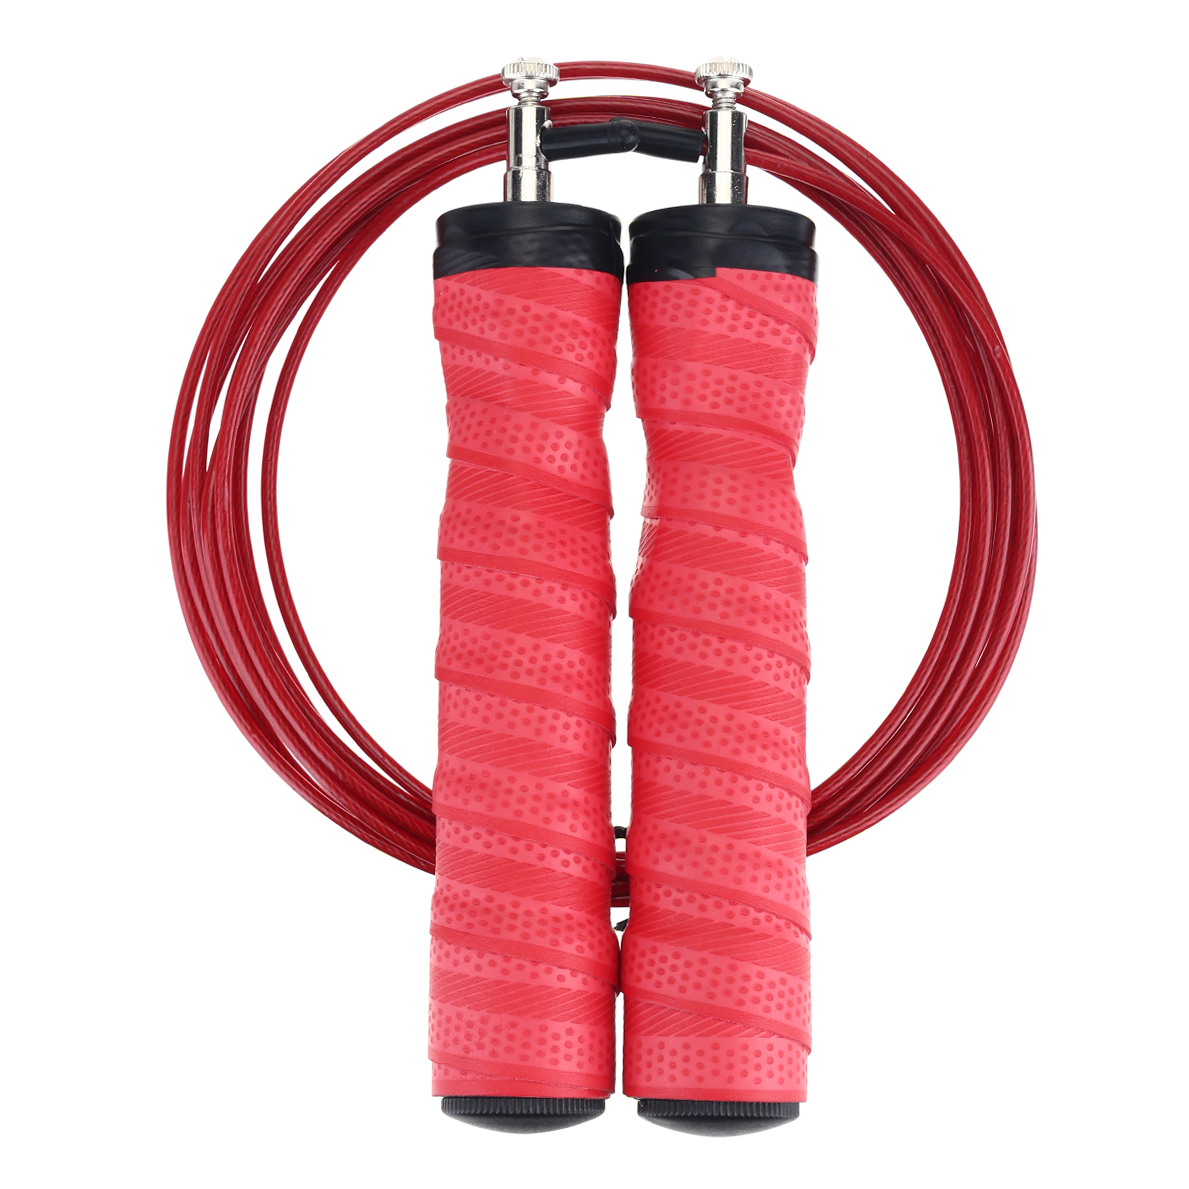 300cm-Length-Rope-Jumping-High-Speed-Aerobic-Steel-Wire-Jump-Rope-Fitness-Equipment-Skipping-1679175-9